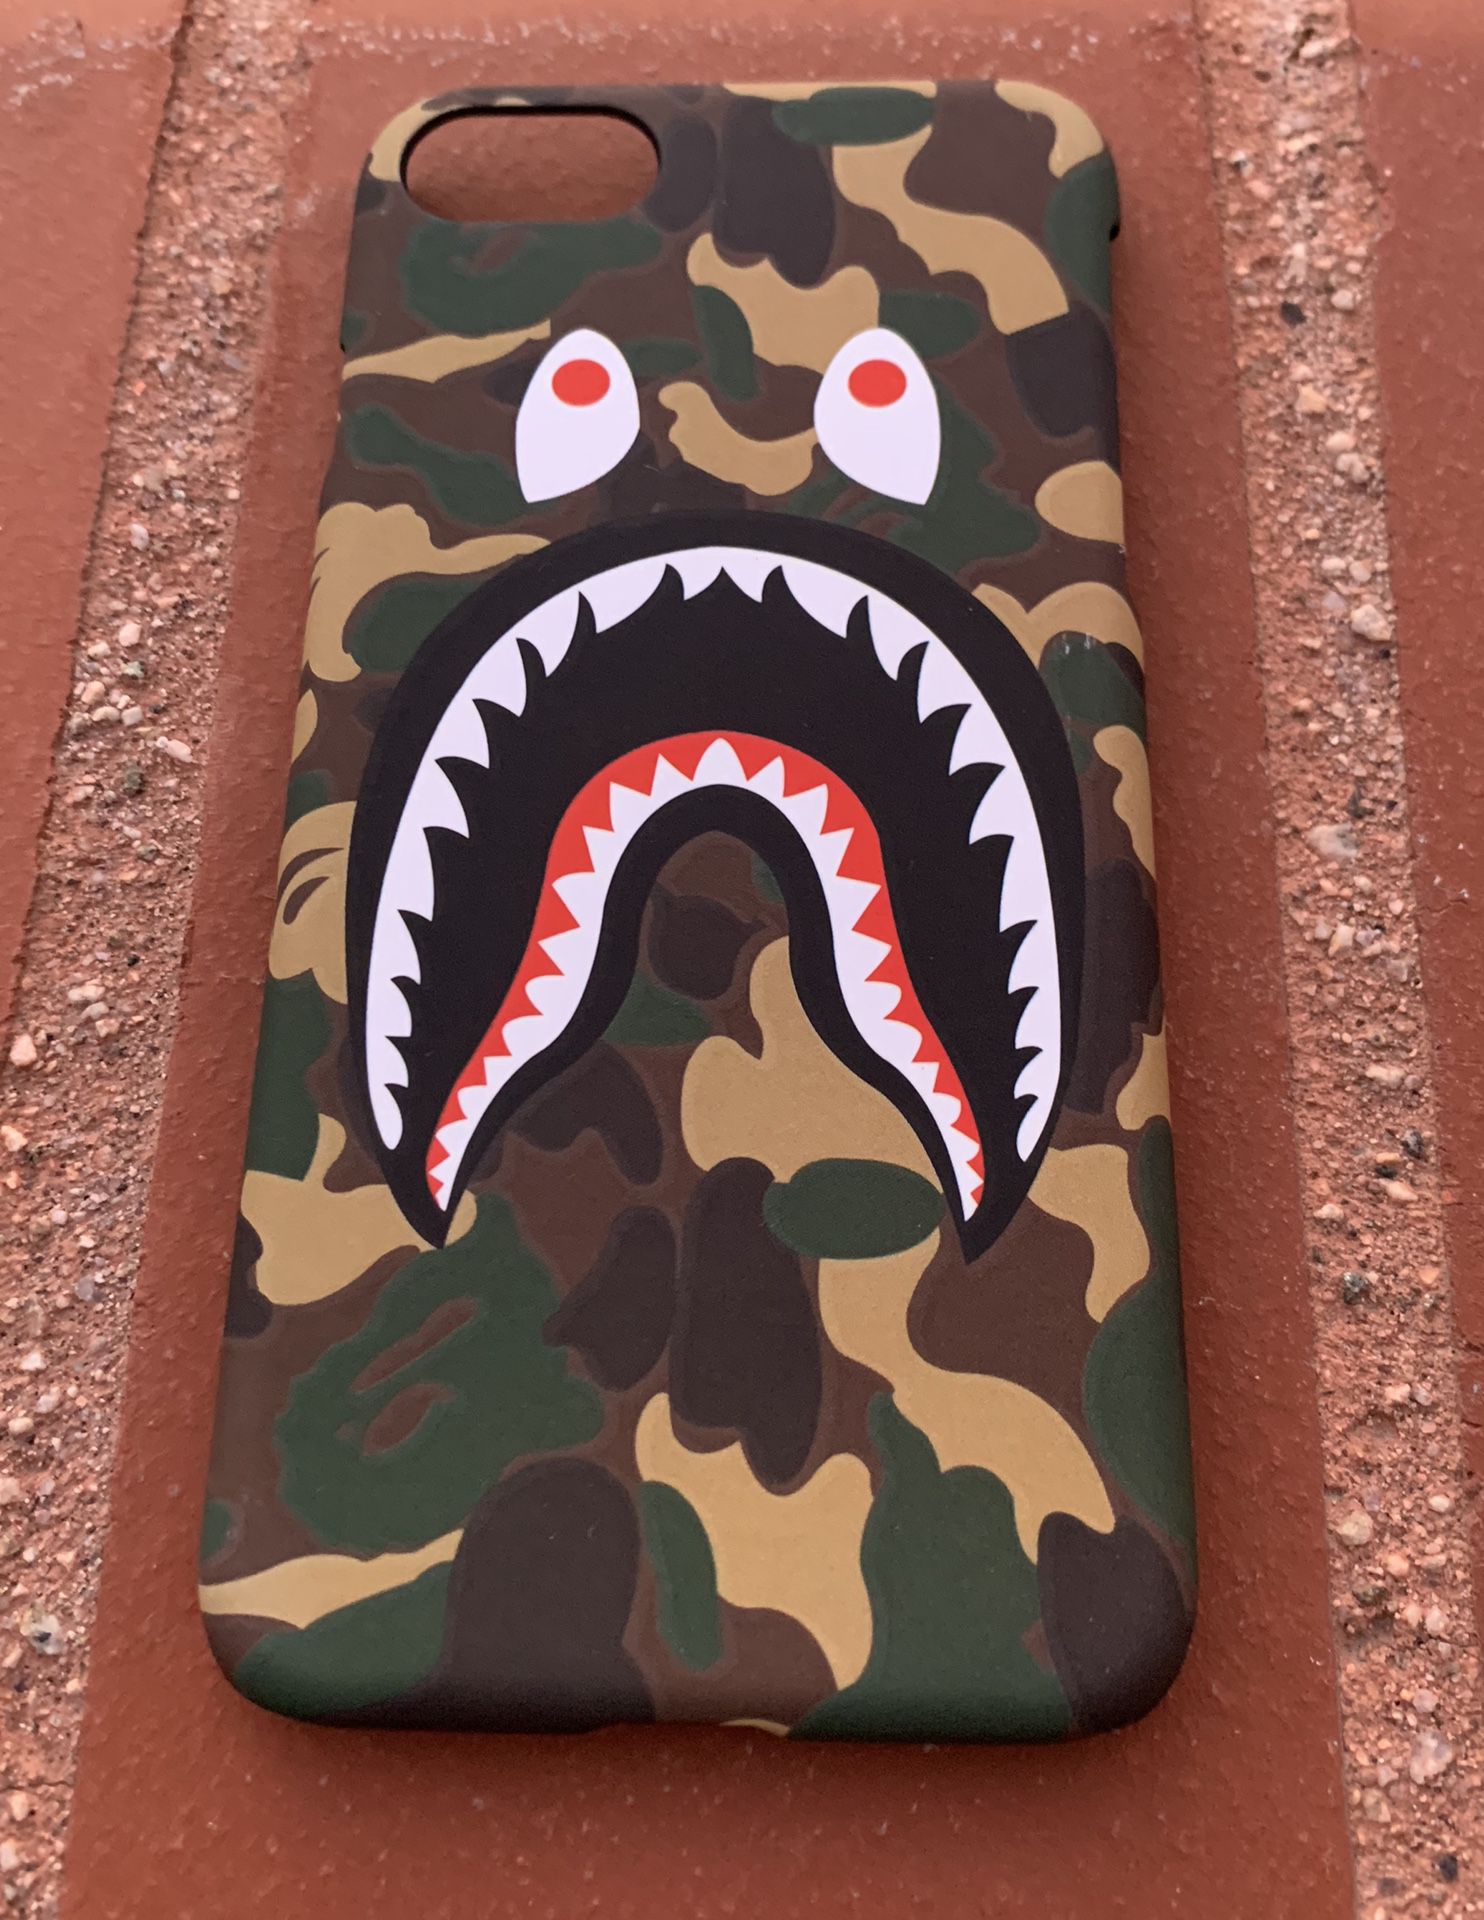 New! Supreme Bape iPhone 7/8 Hard Cover Case Hypebeast for Sale in Hacienda  Heights, CA - OfferUp